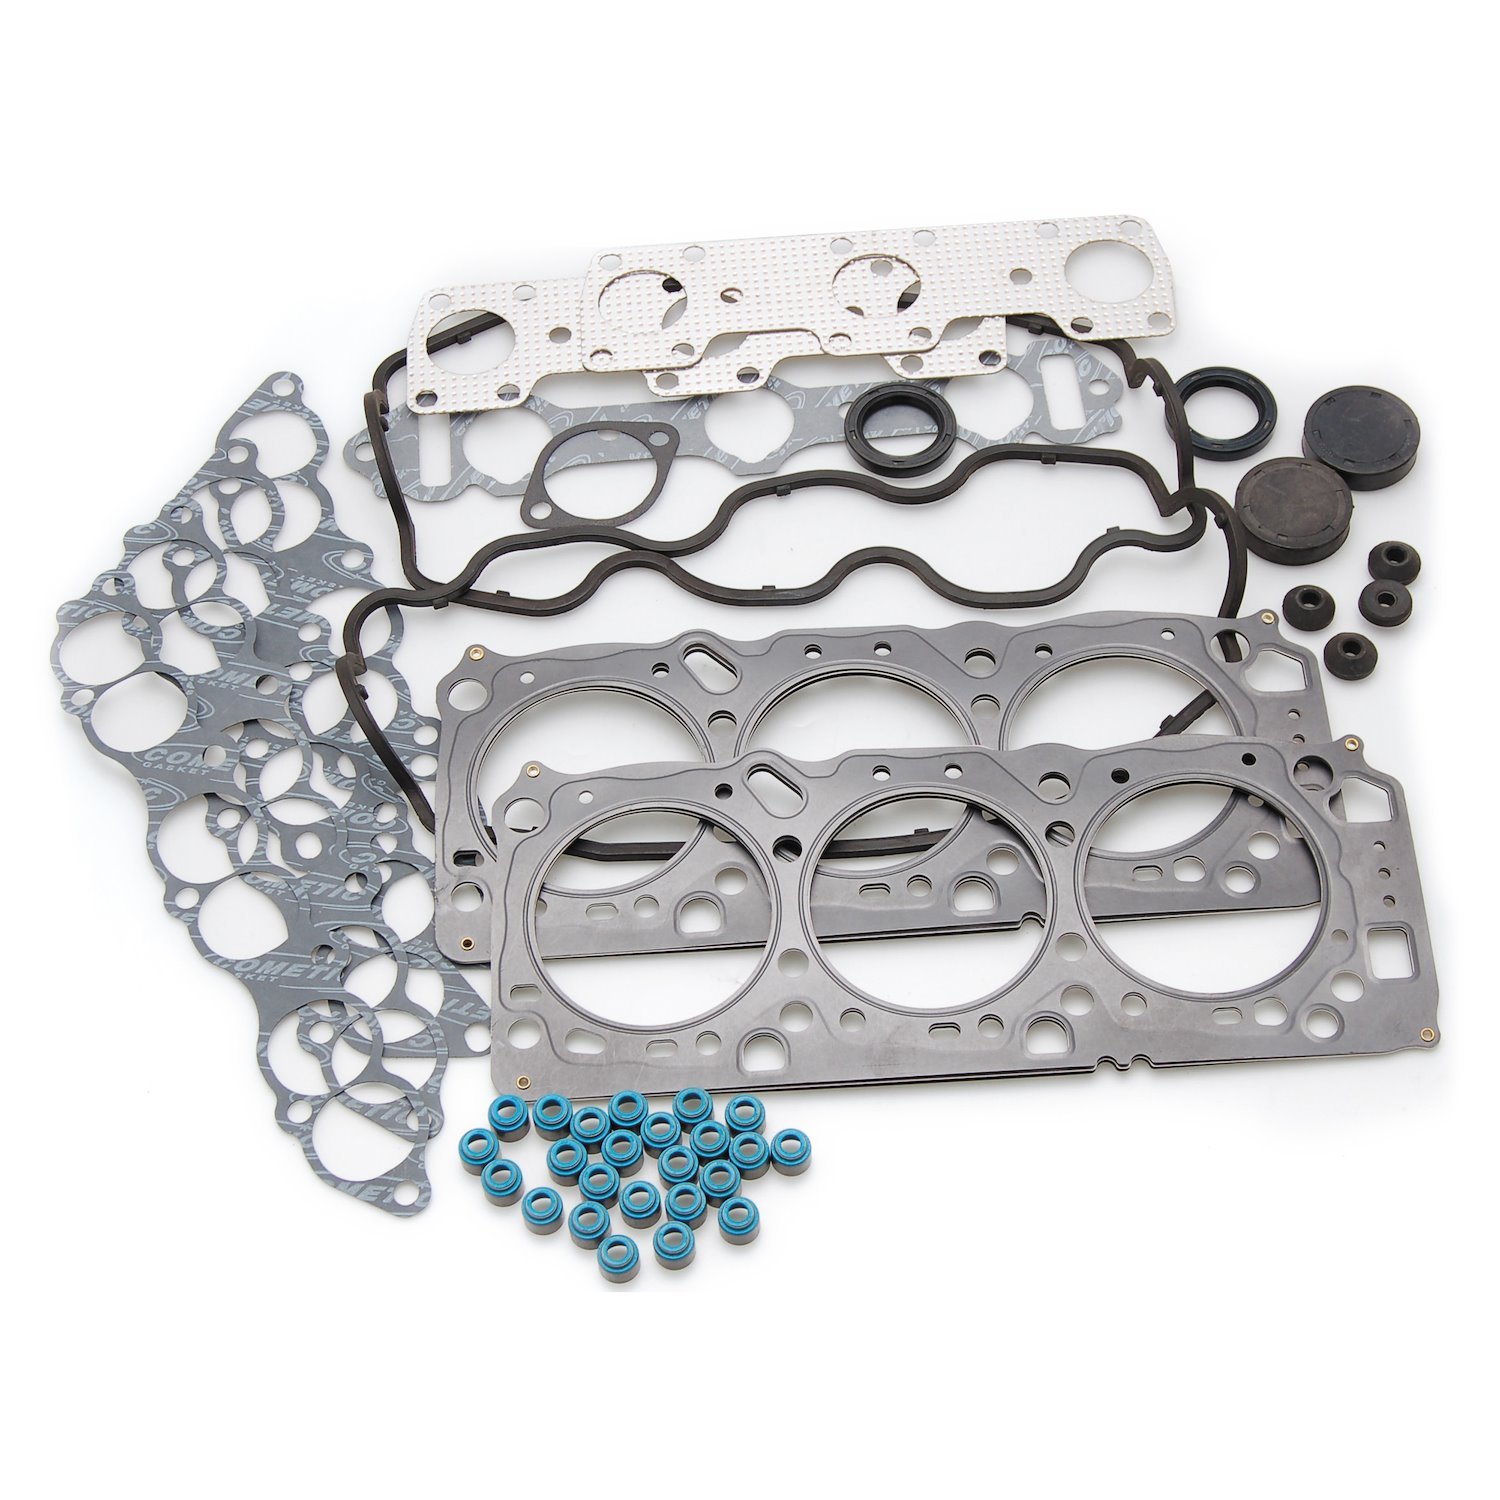 Top End Street Pro Gasket Kit for Select 1992-1996 Mitsubishi 3000GT, Diamante, Mighty Max, Montero, Pajero with 6G72 Engine